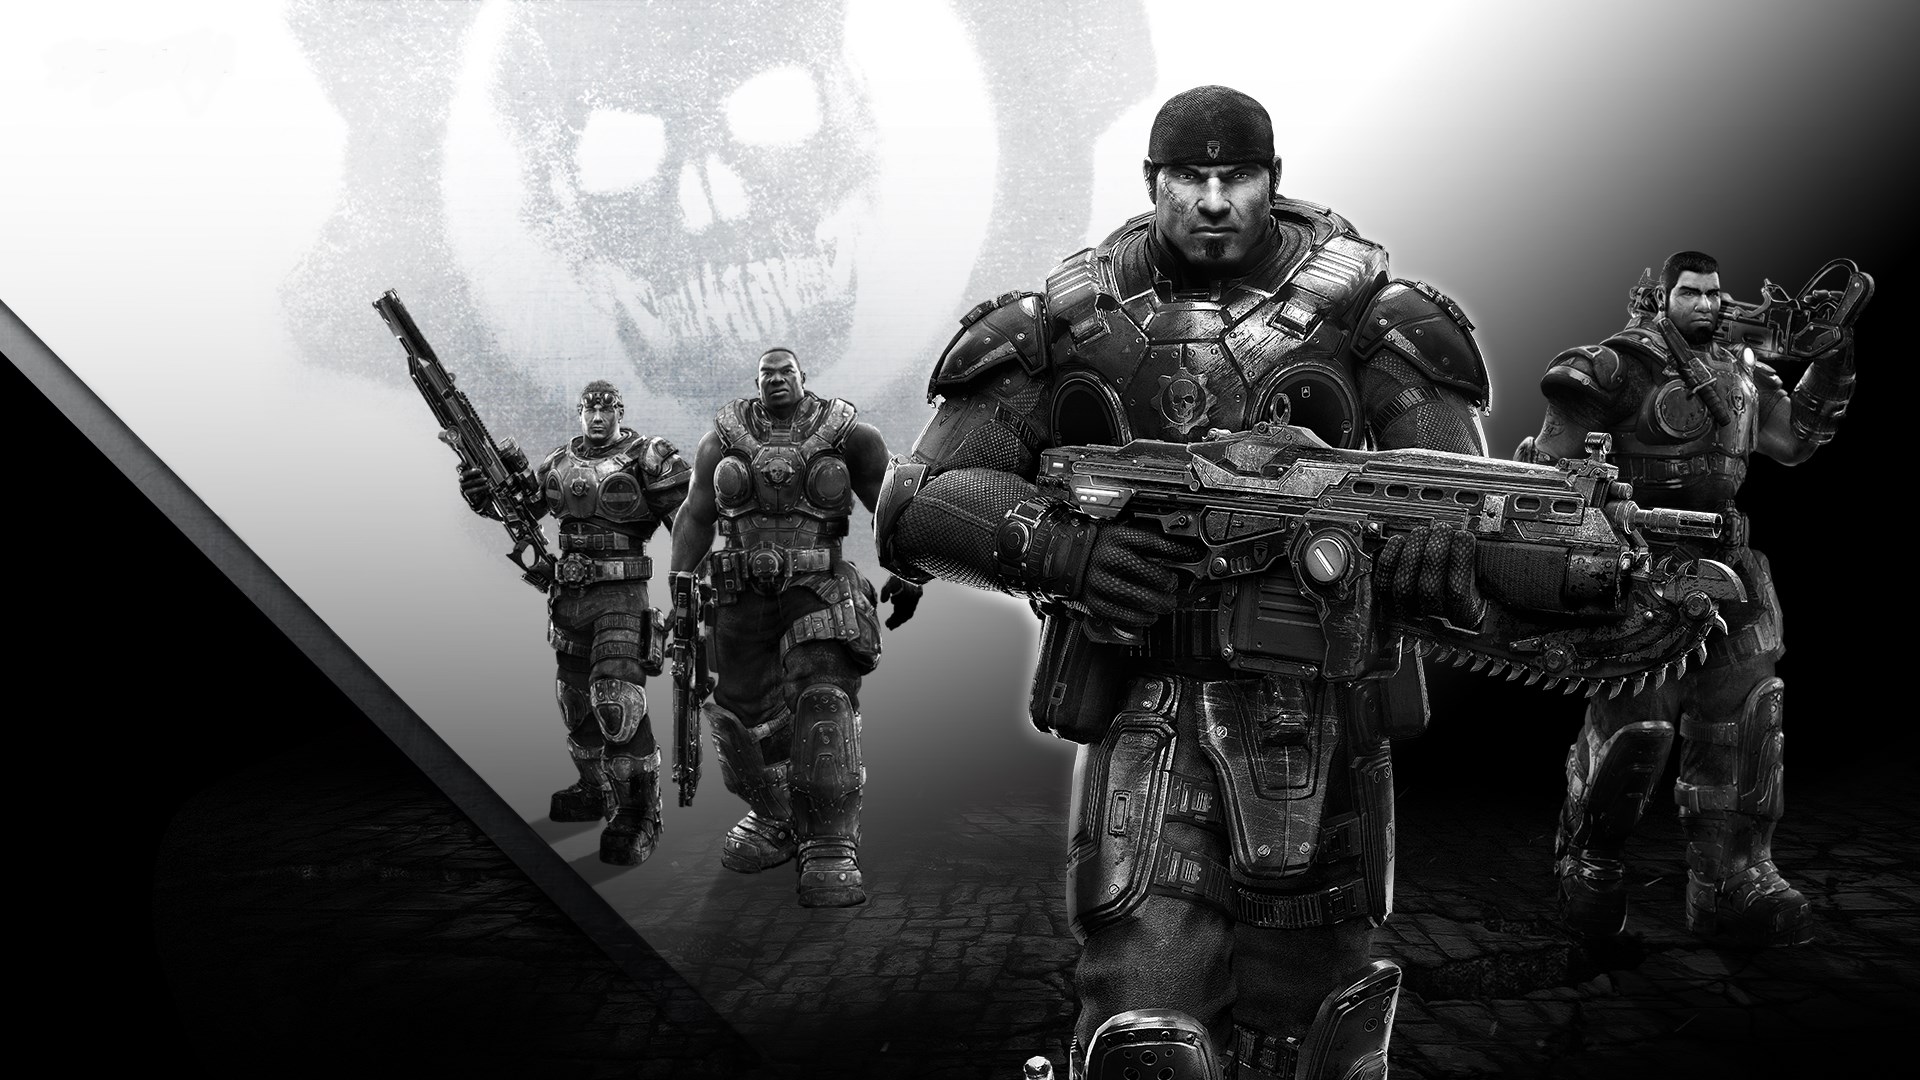 Buy Gears of War Ultimate Edition Deluxe Version (Xbox) cheap from 1 USD |  Xbox-Now